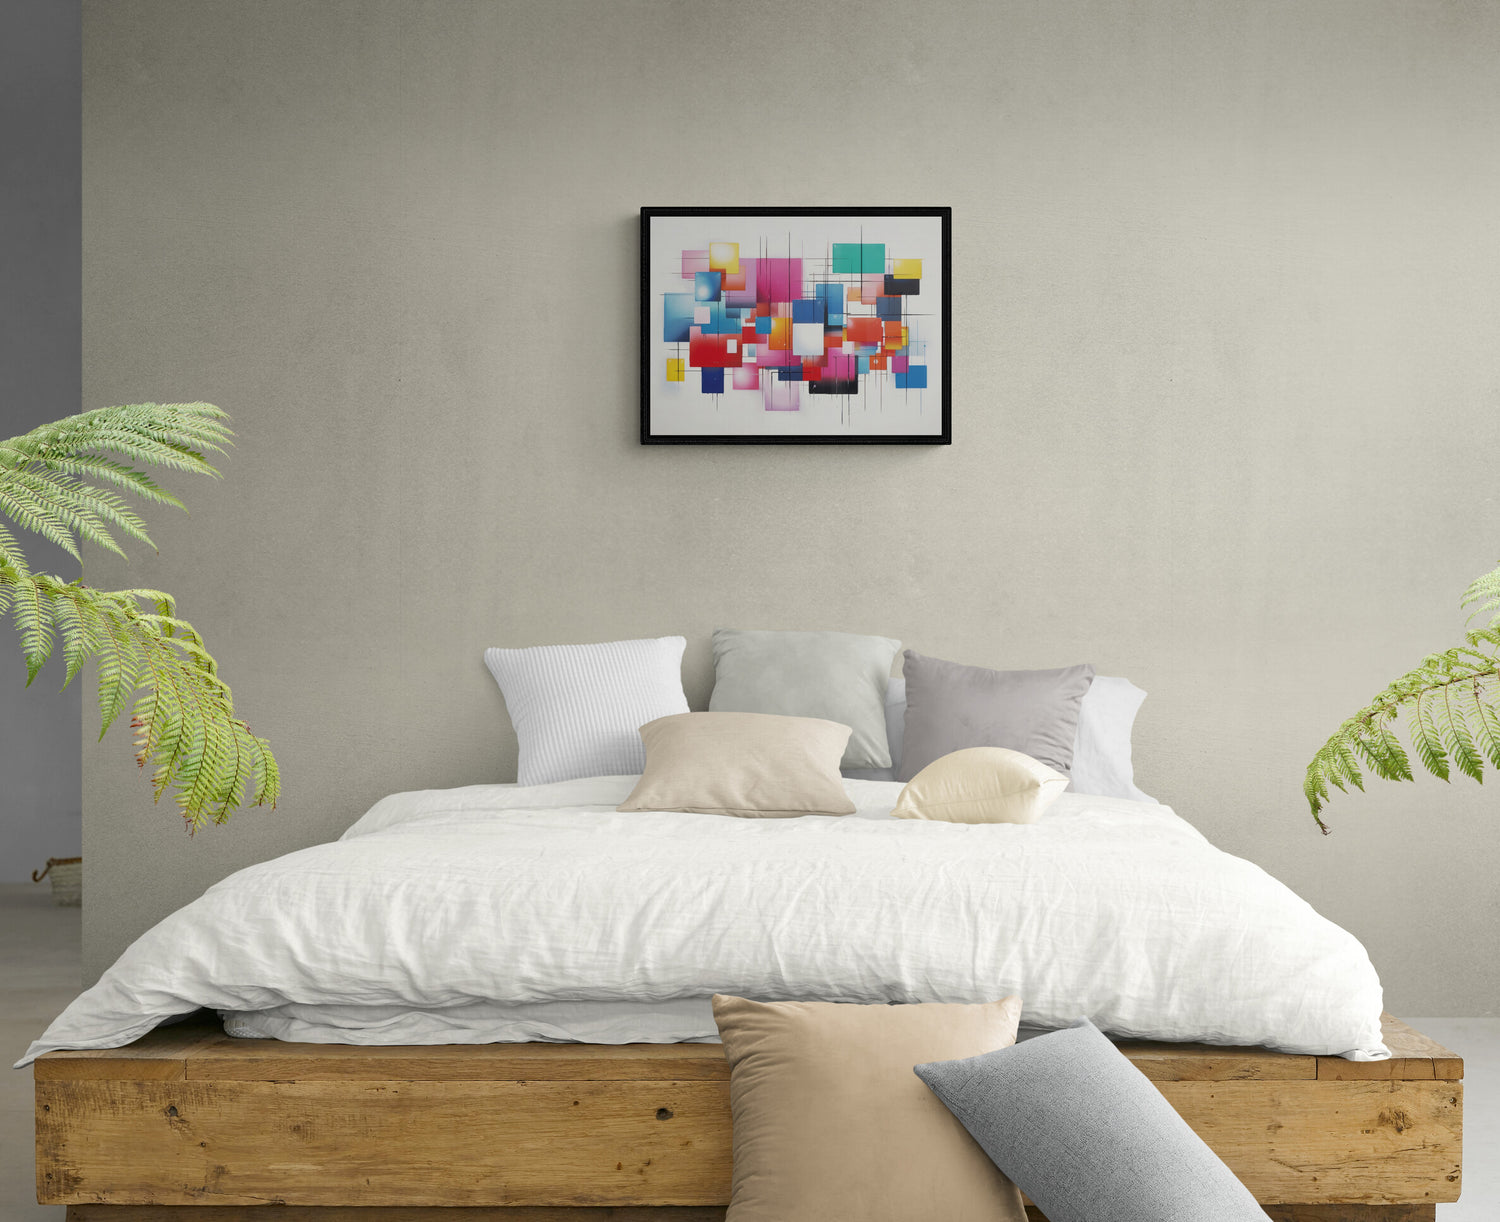 abstract wall art above bohemian style bedroom with tropical plants